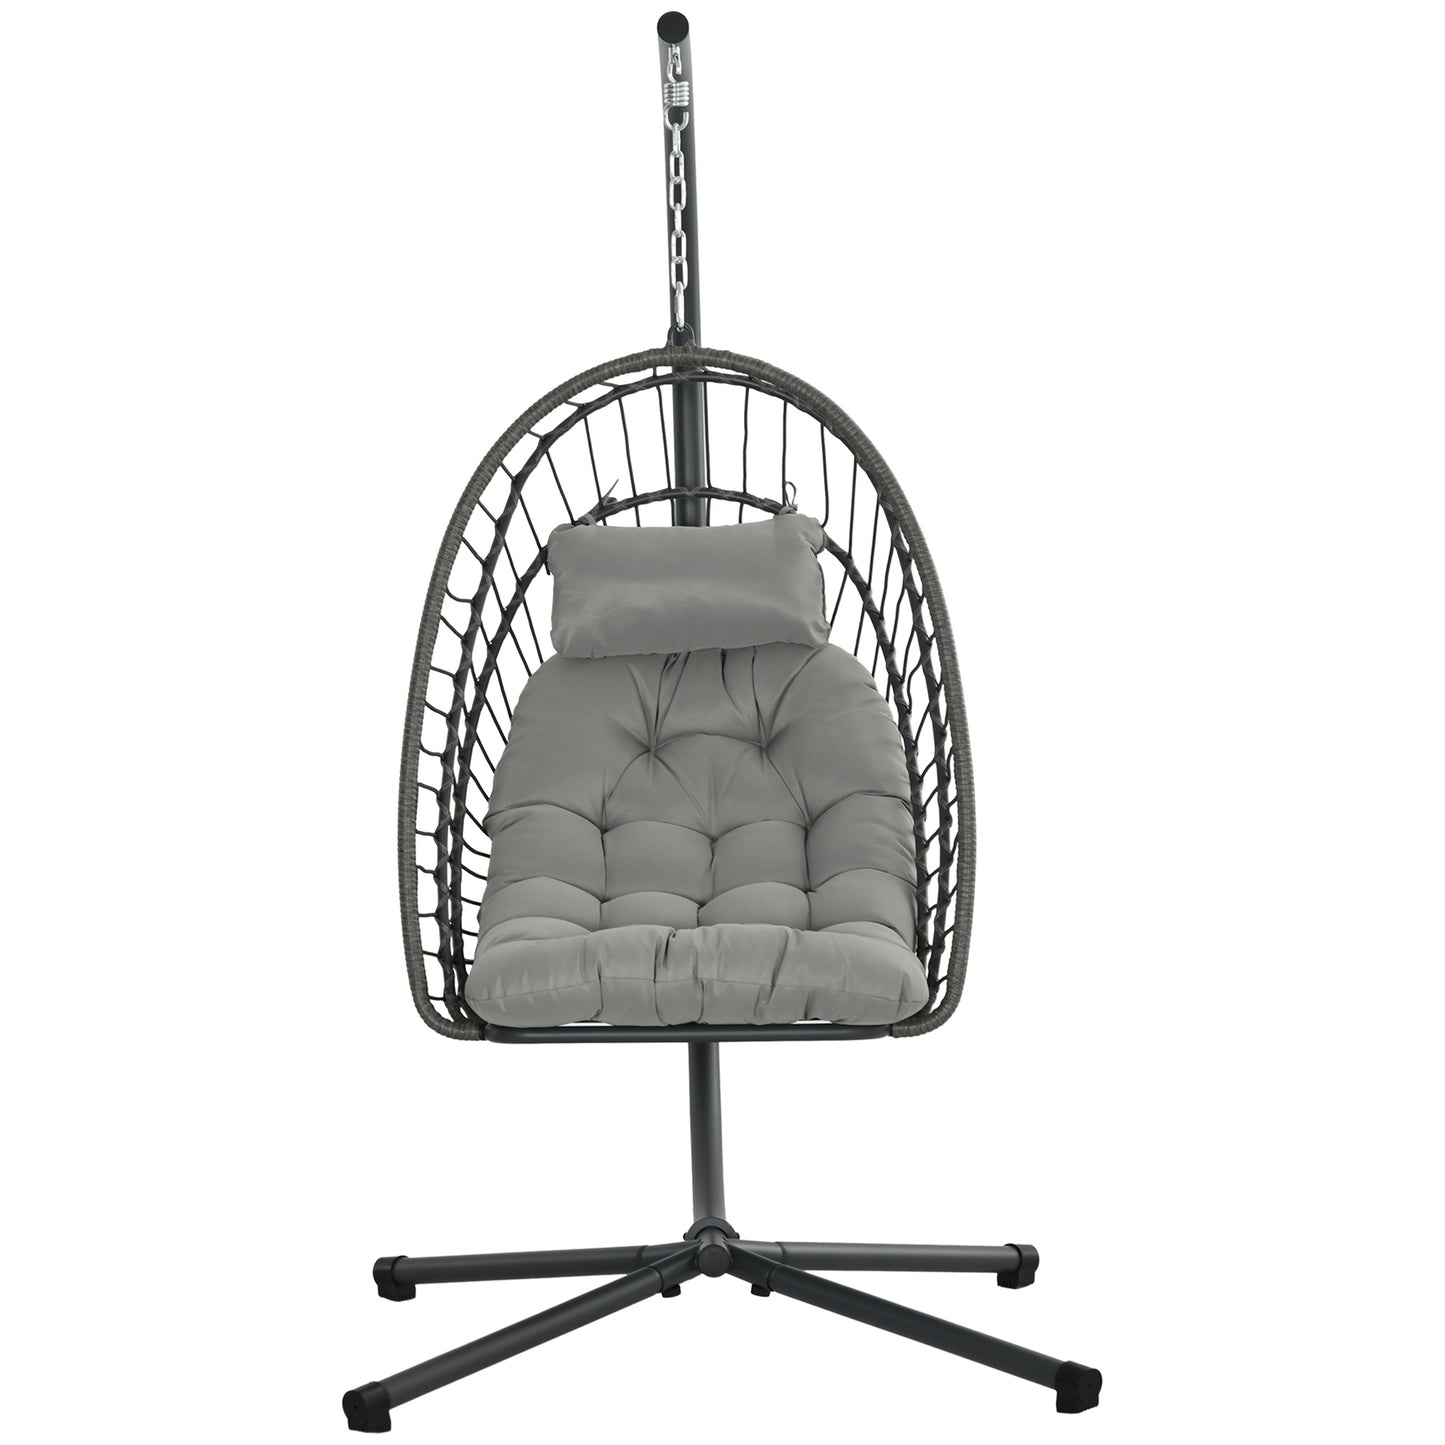 Outsunny Outdoor PE Rattan Swing Chair with Cushion, Garden Foldable Basket Patio Hanging Egg Chair with Metal Stand, Headrest, for Indoor and Outdoor, Light Grey